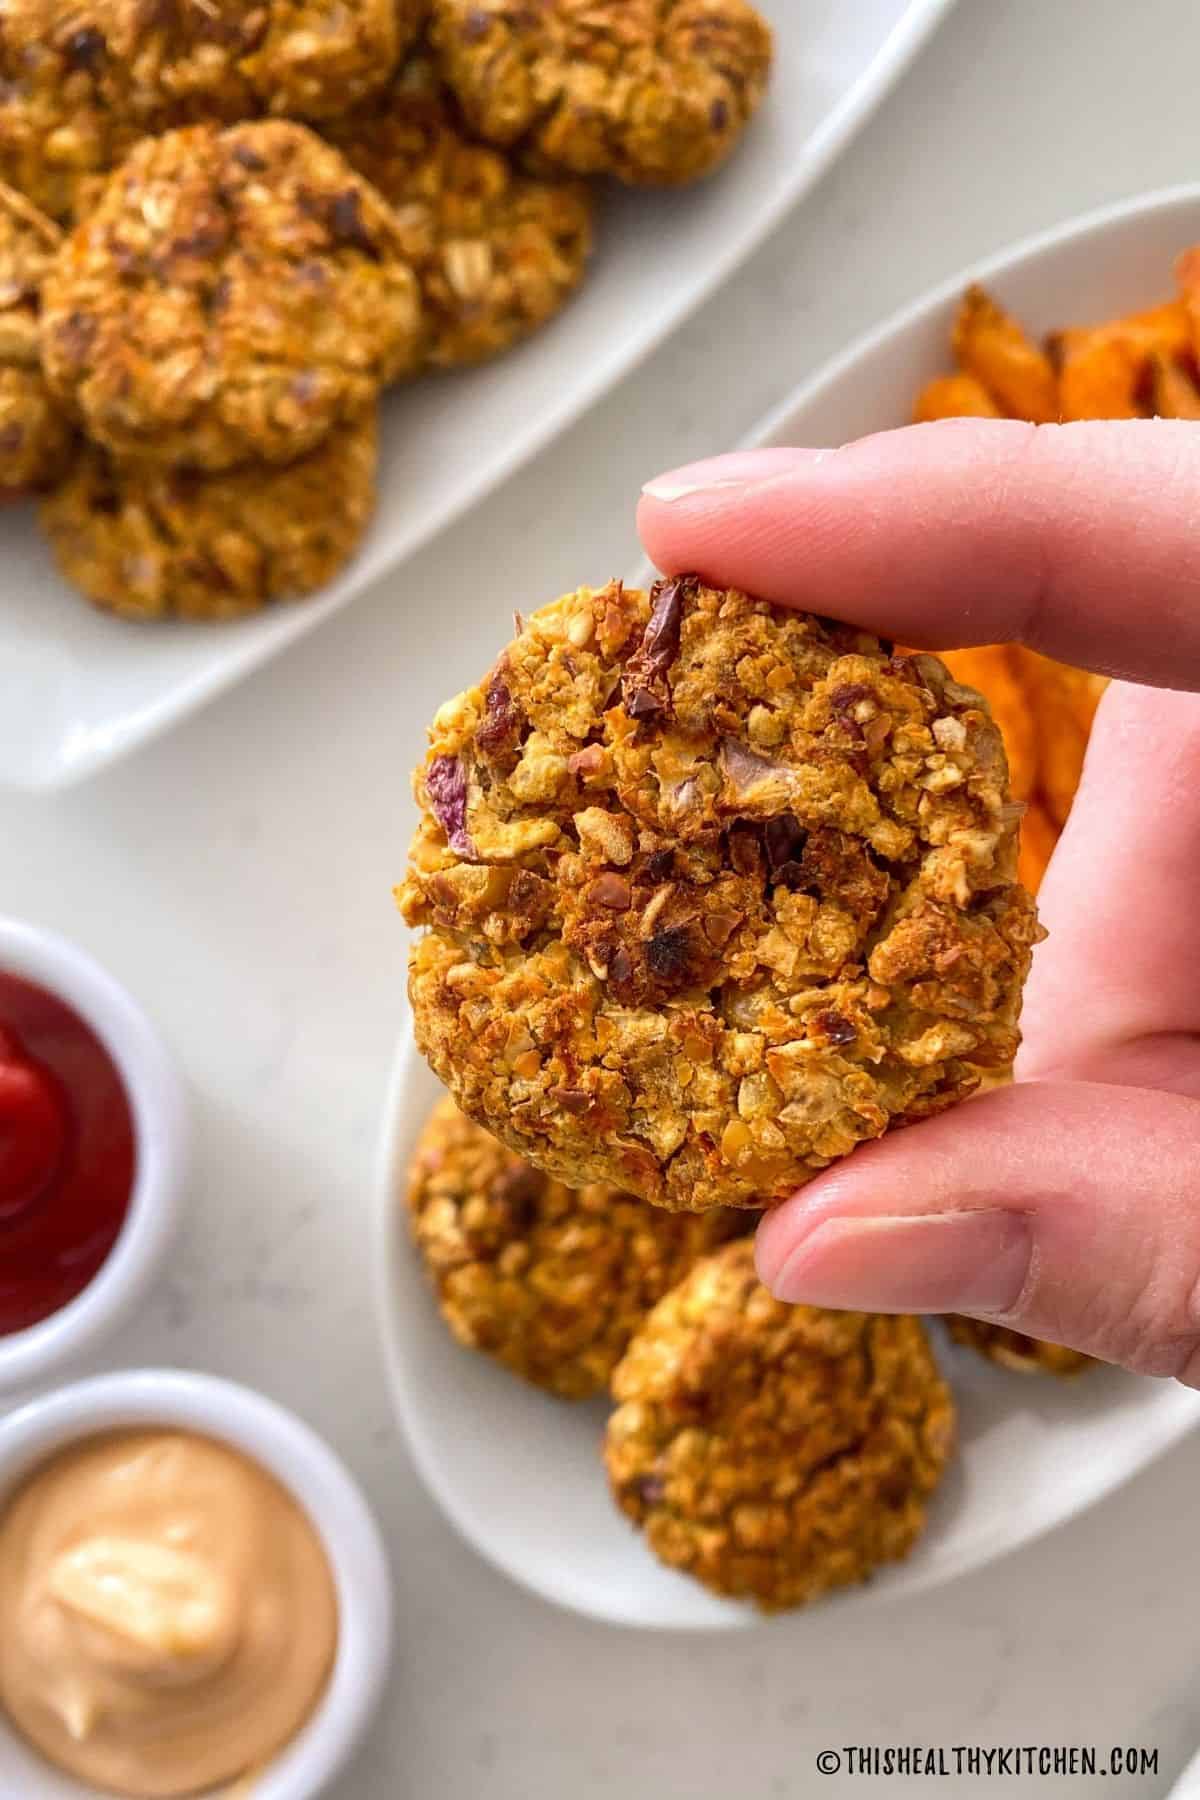 Hand holding up one vegan nugget above platter with more of them.